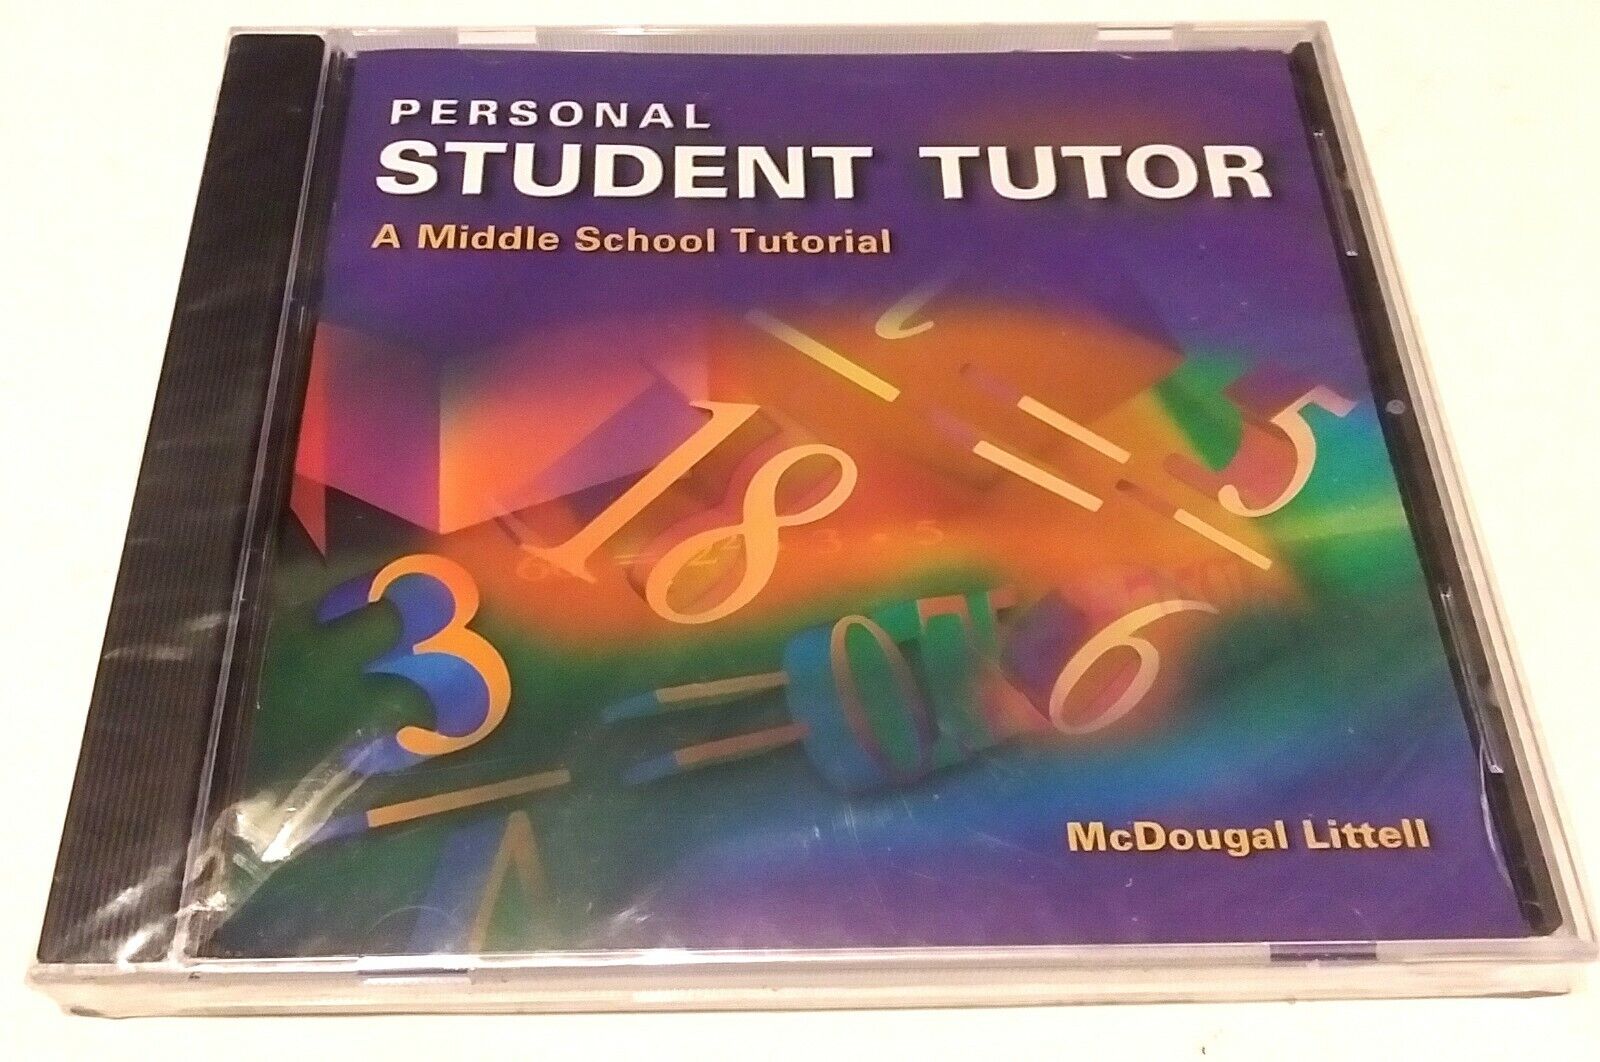 NEW - MCDOUGAL LITTELL PERSONAL A MIDDLE SCHOOL TUTORIAL - STUDENT TUTOR CD ROM